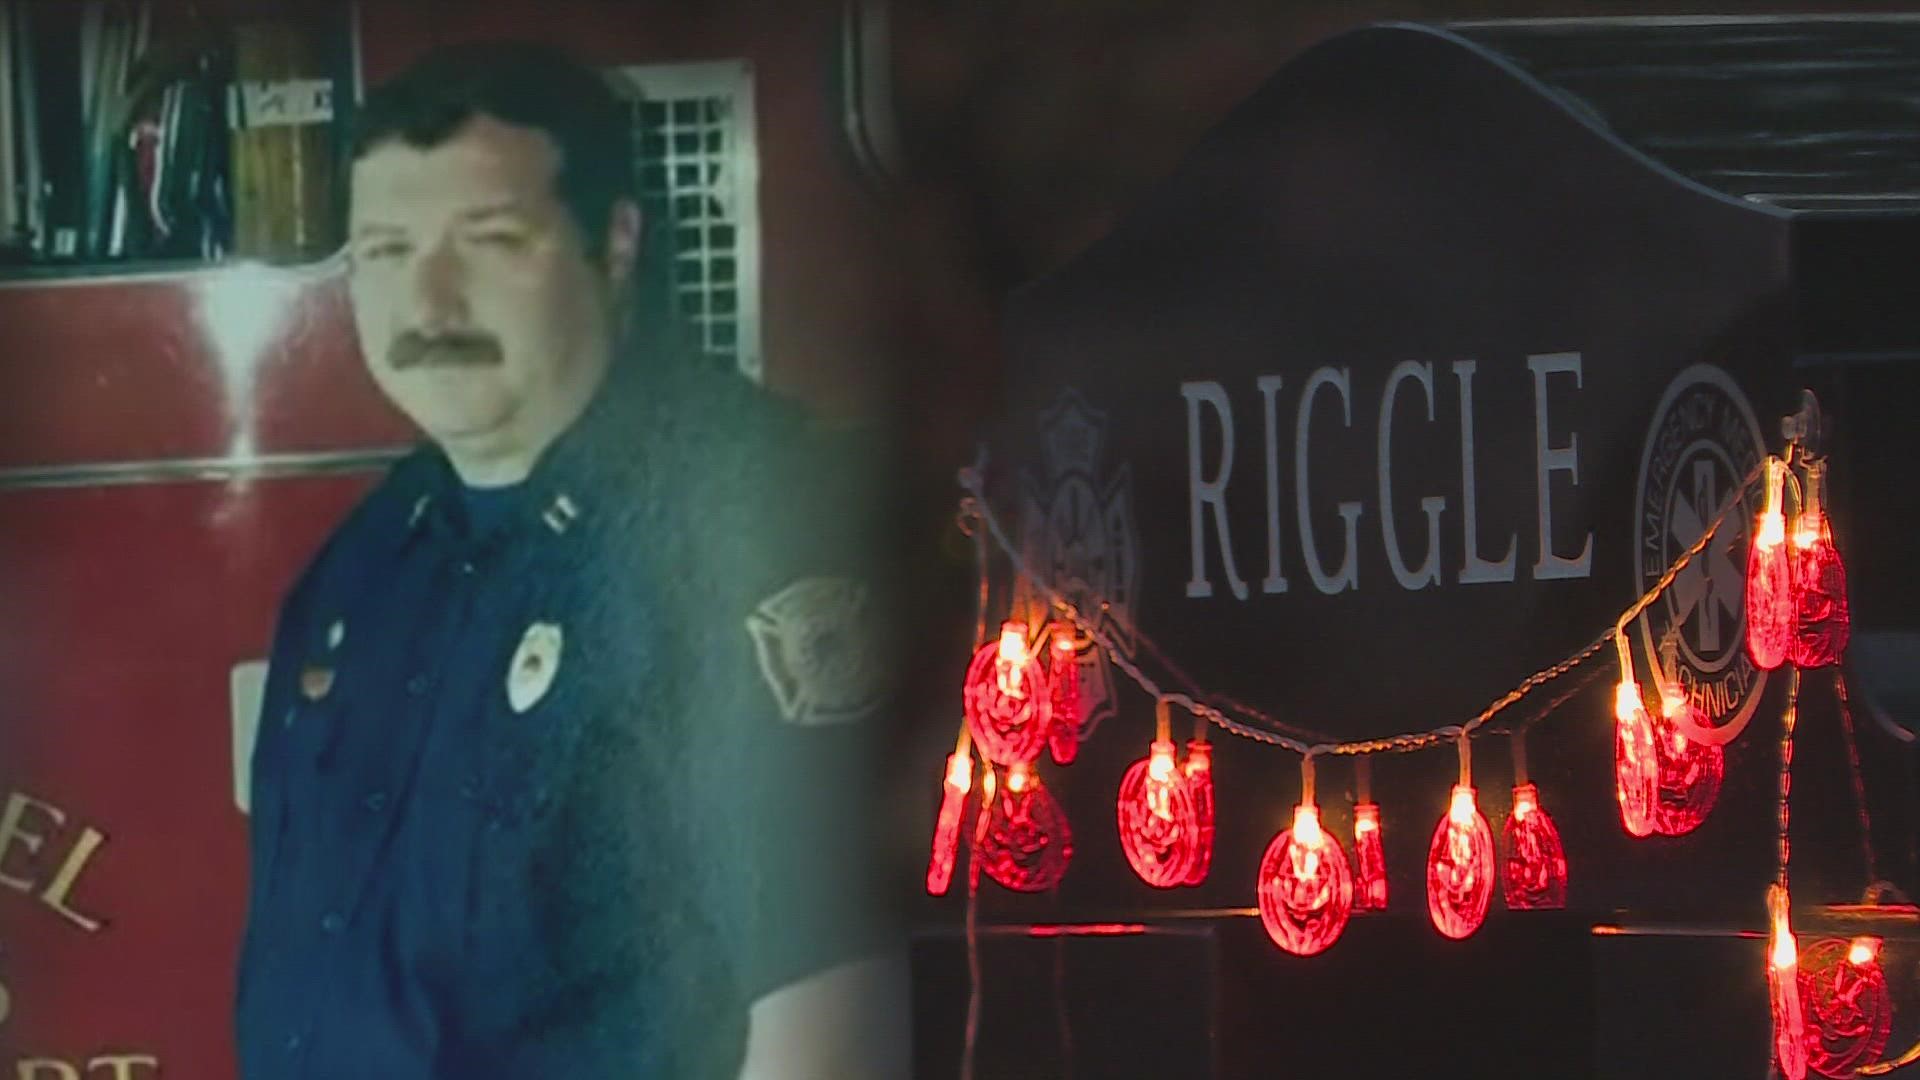 The late Captain Charlie Riggle was remembered by his family and loved ones five years after he passed away from cancer.